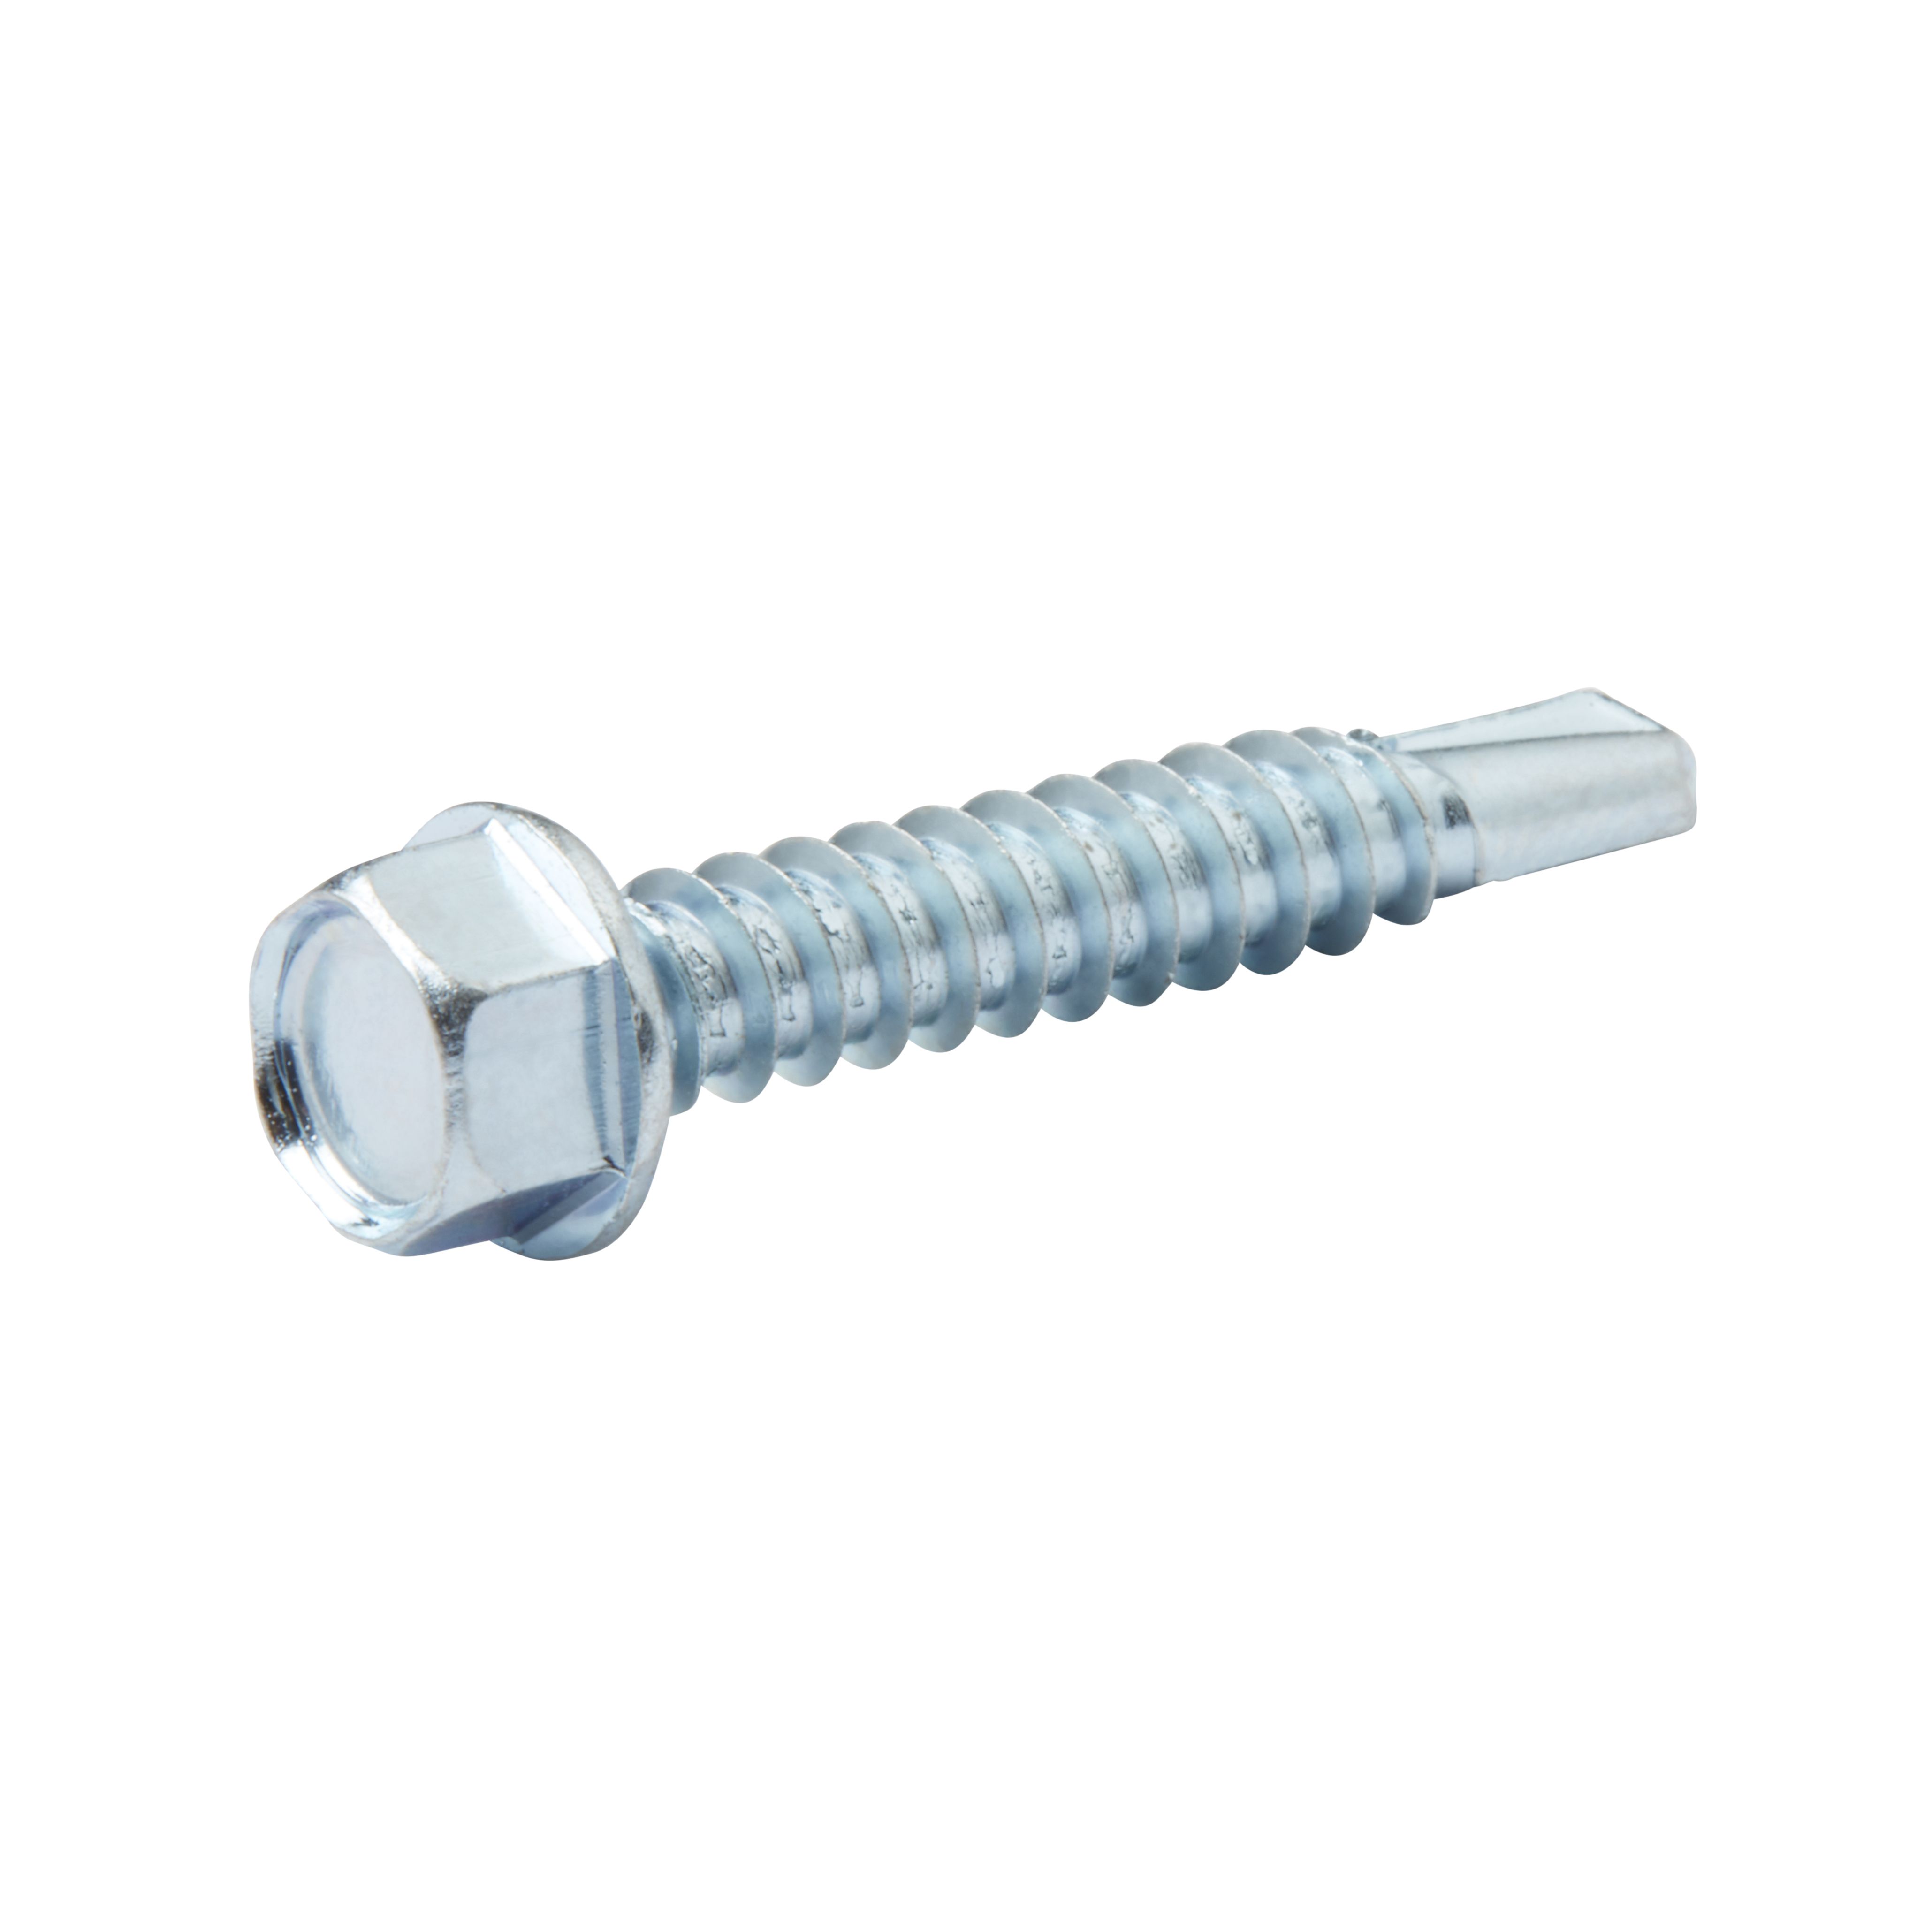 Diall Hex Zinc-plated Carbon steel Screw (Dia)5.5mm (L)32mm, Pack of 25